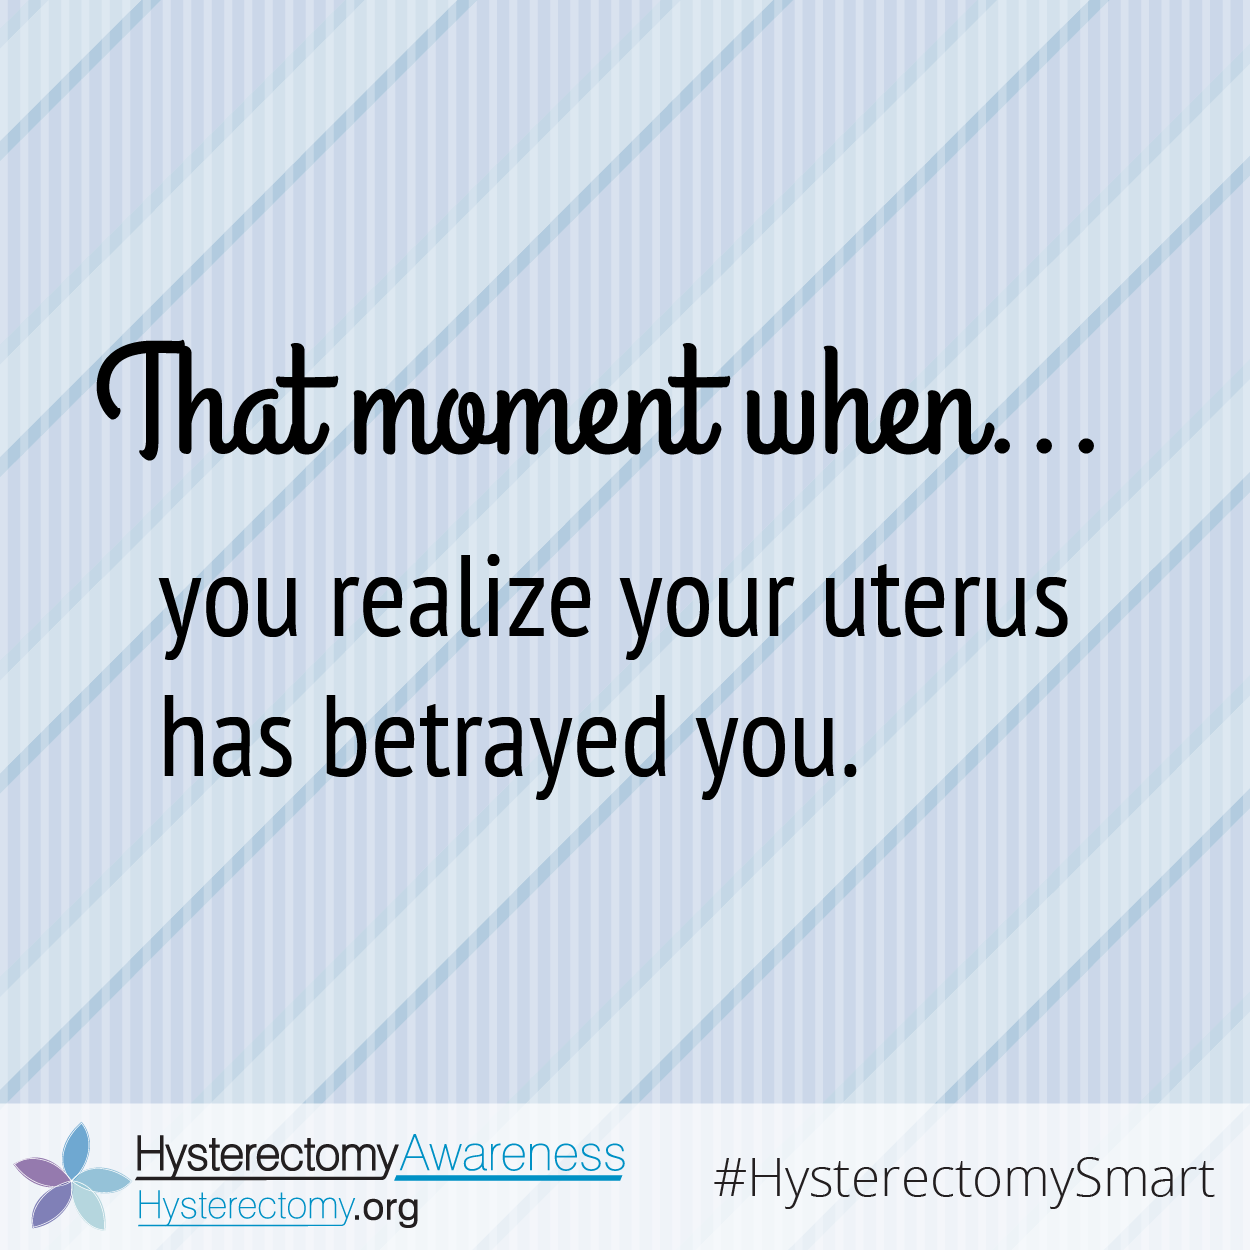 The moment you realize your uterus has betrayed you. #HysterectomySmart